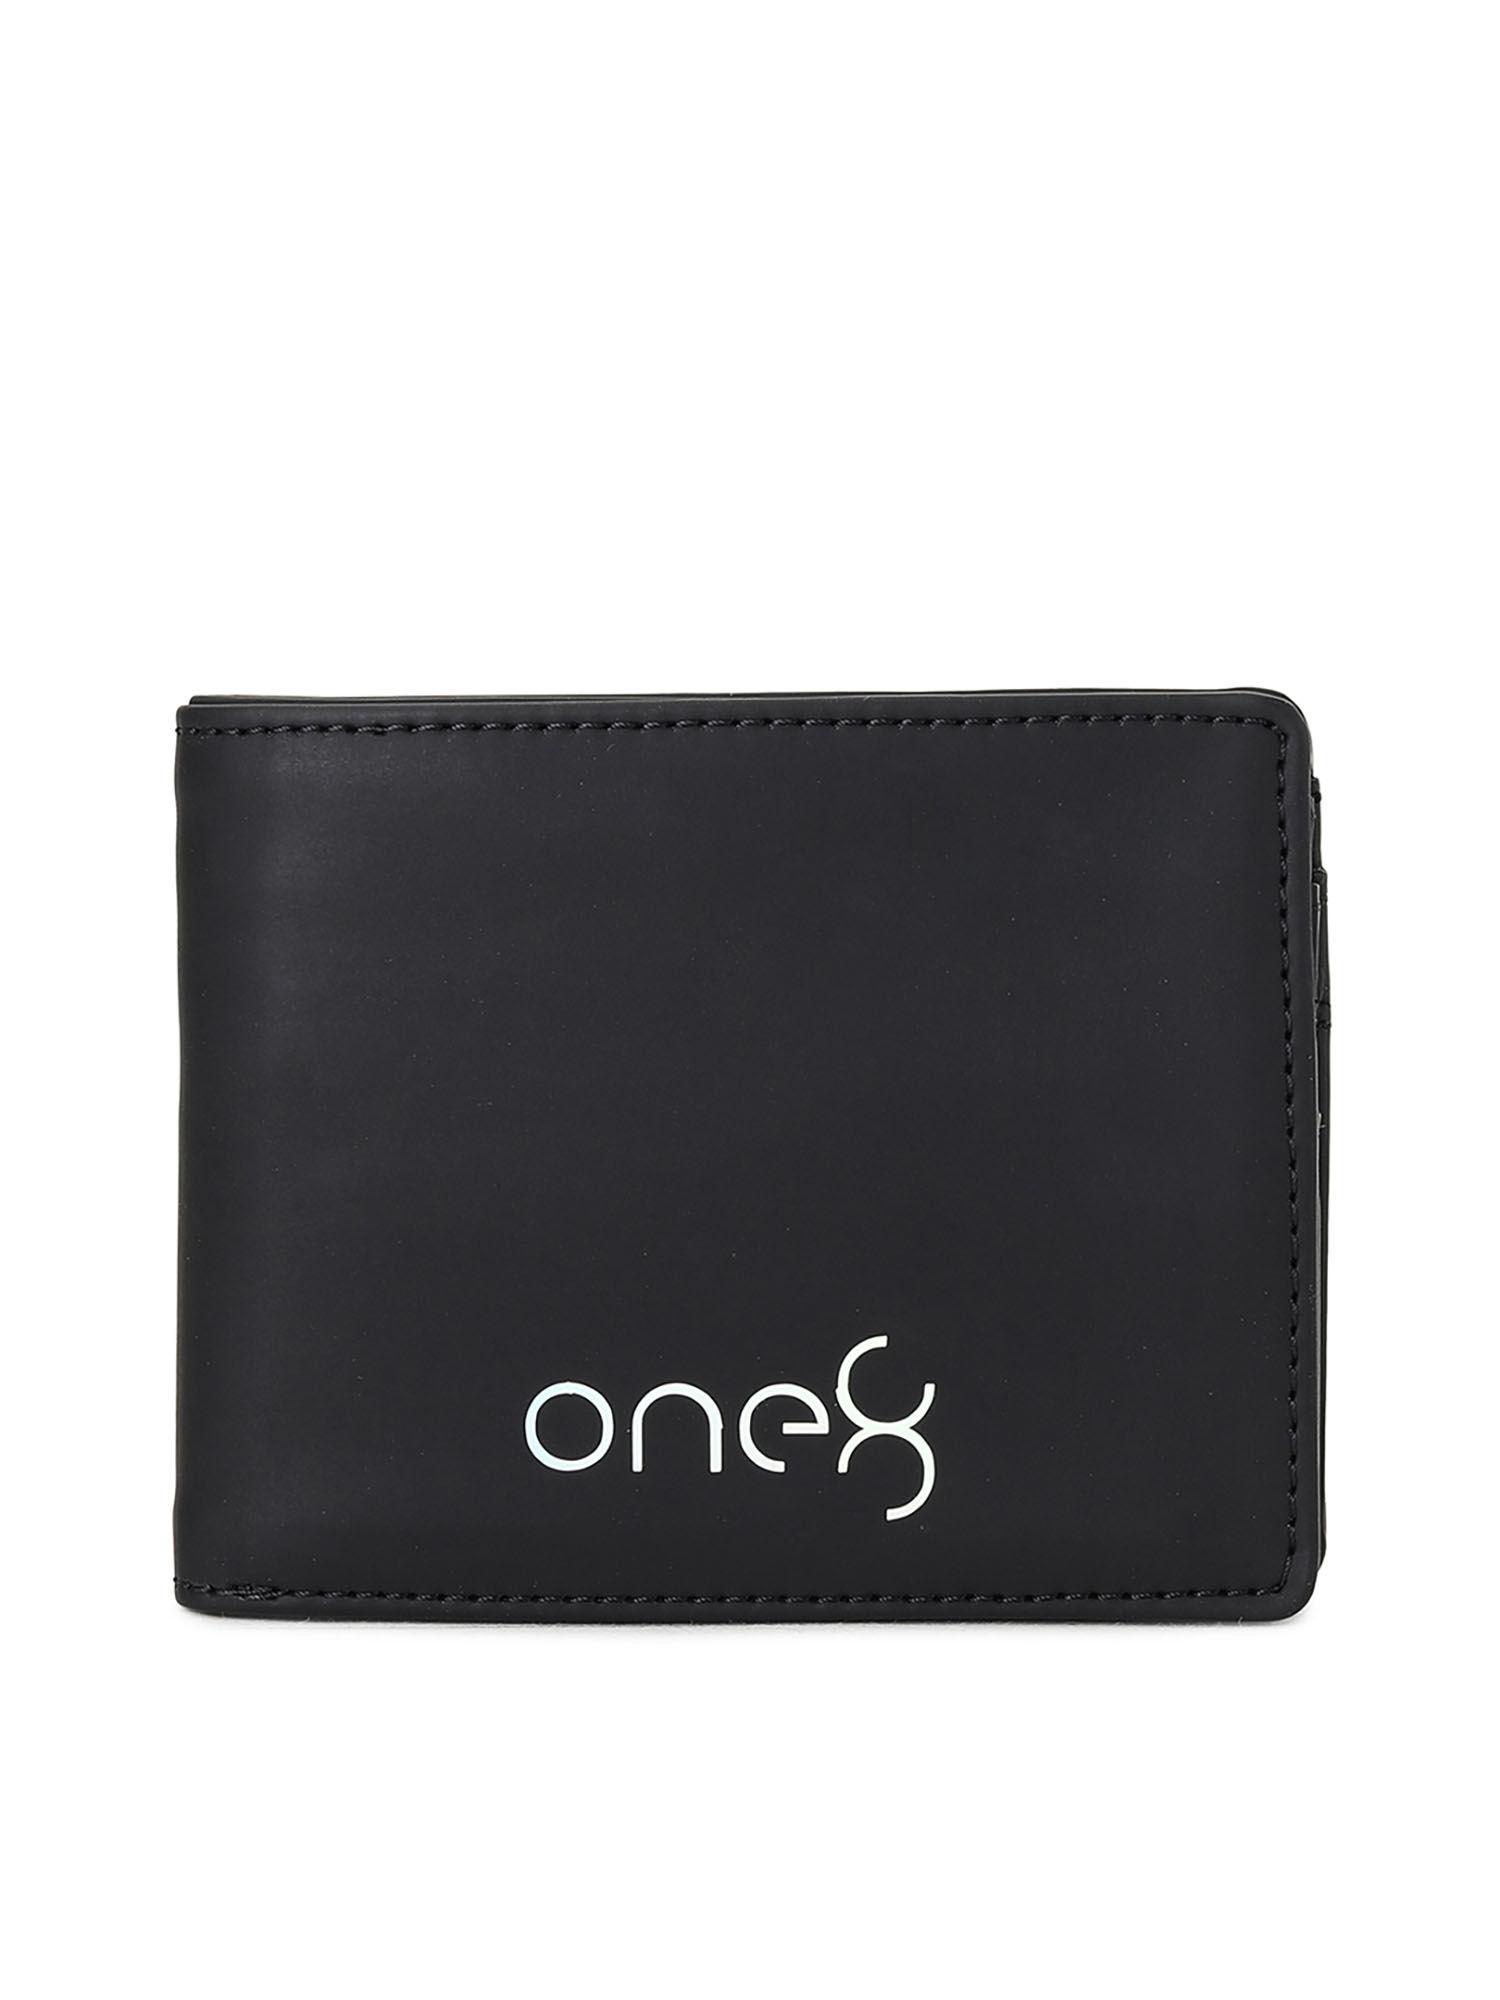 x-one8-stylised-mens-wallet